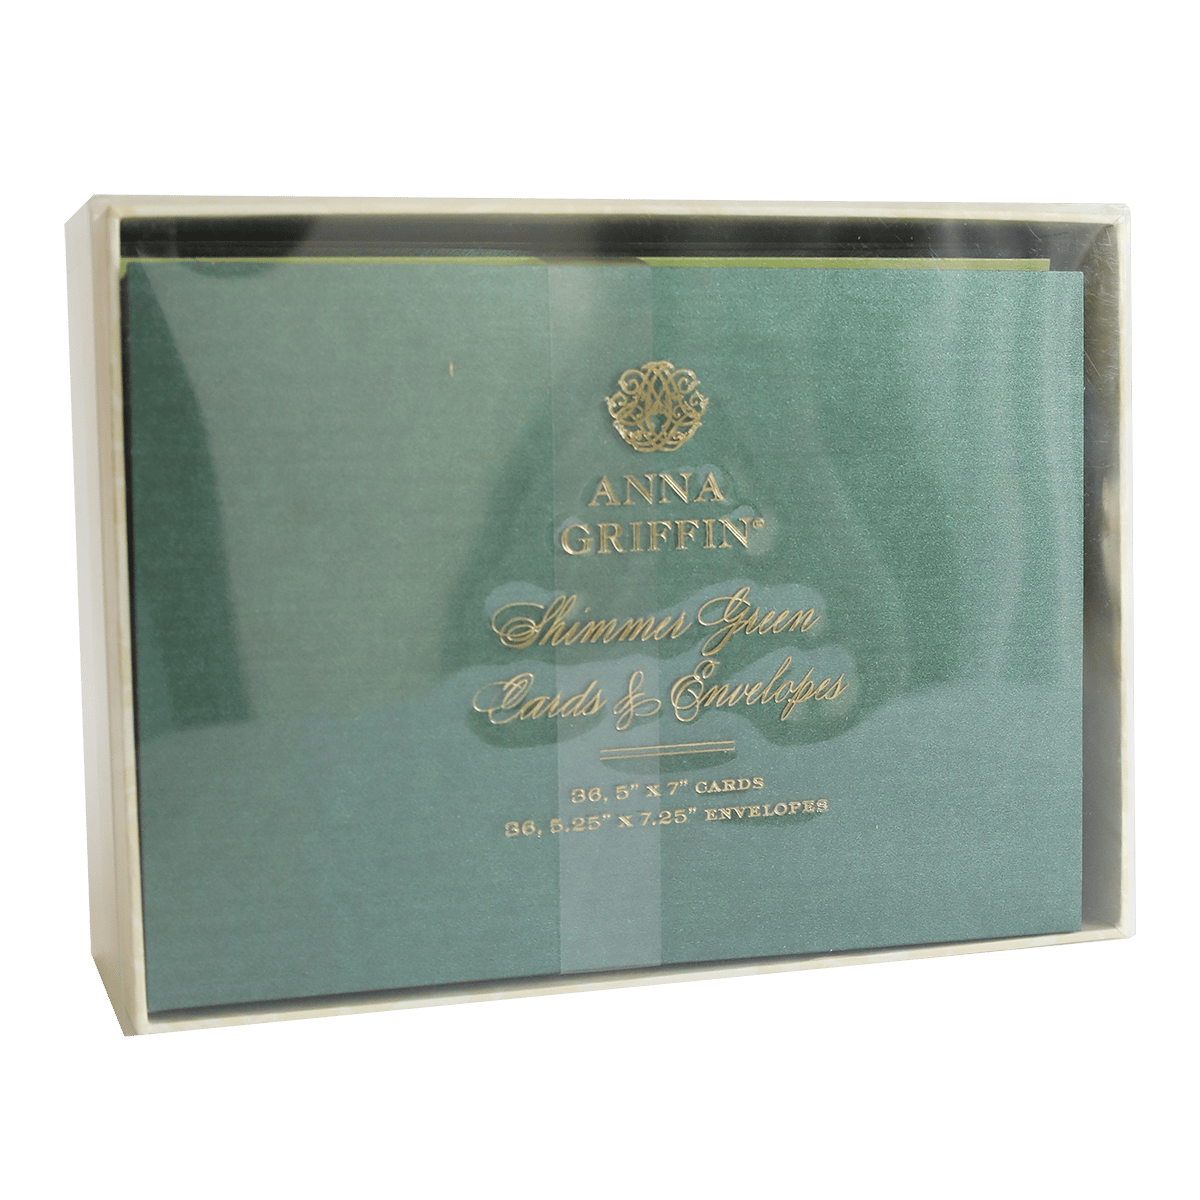 a glass plaque with the name of an award.